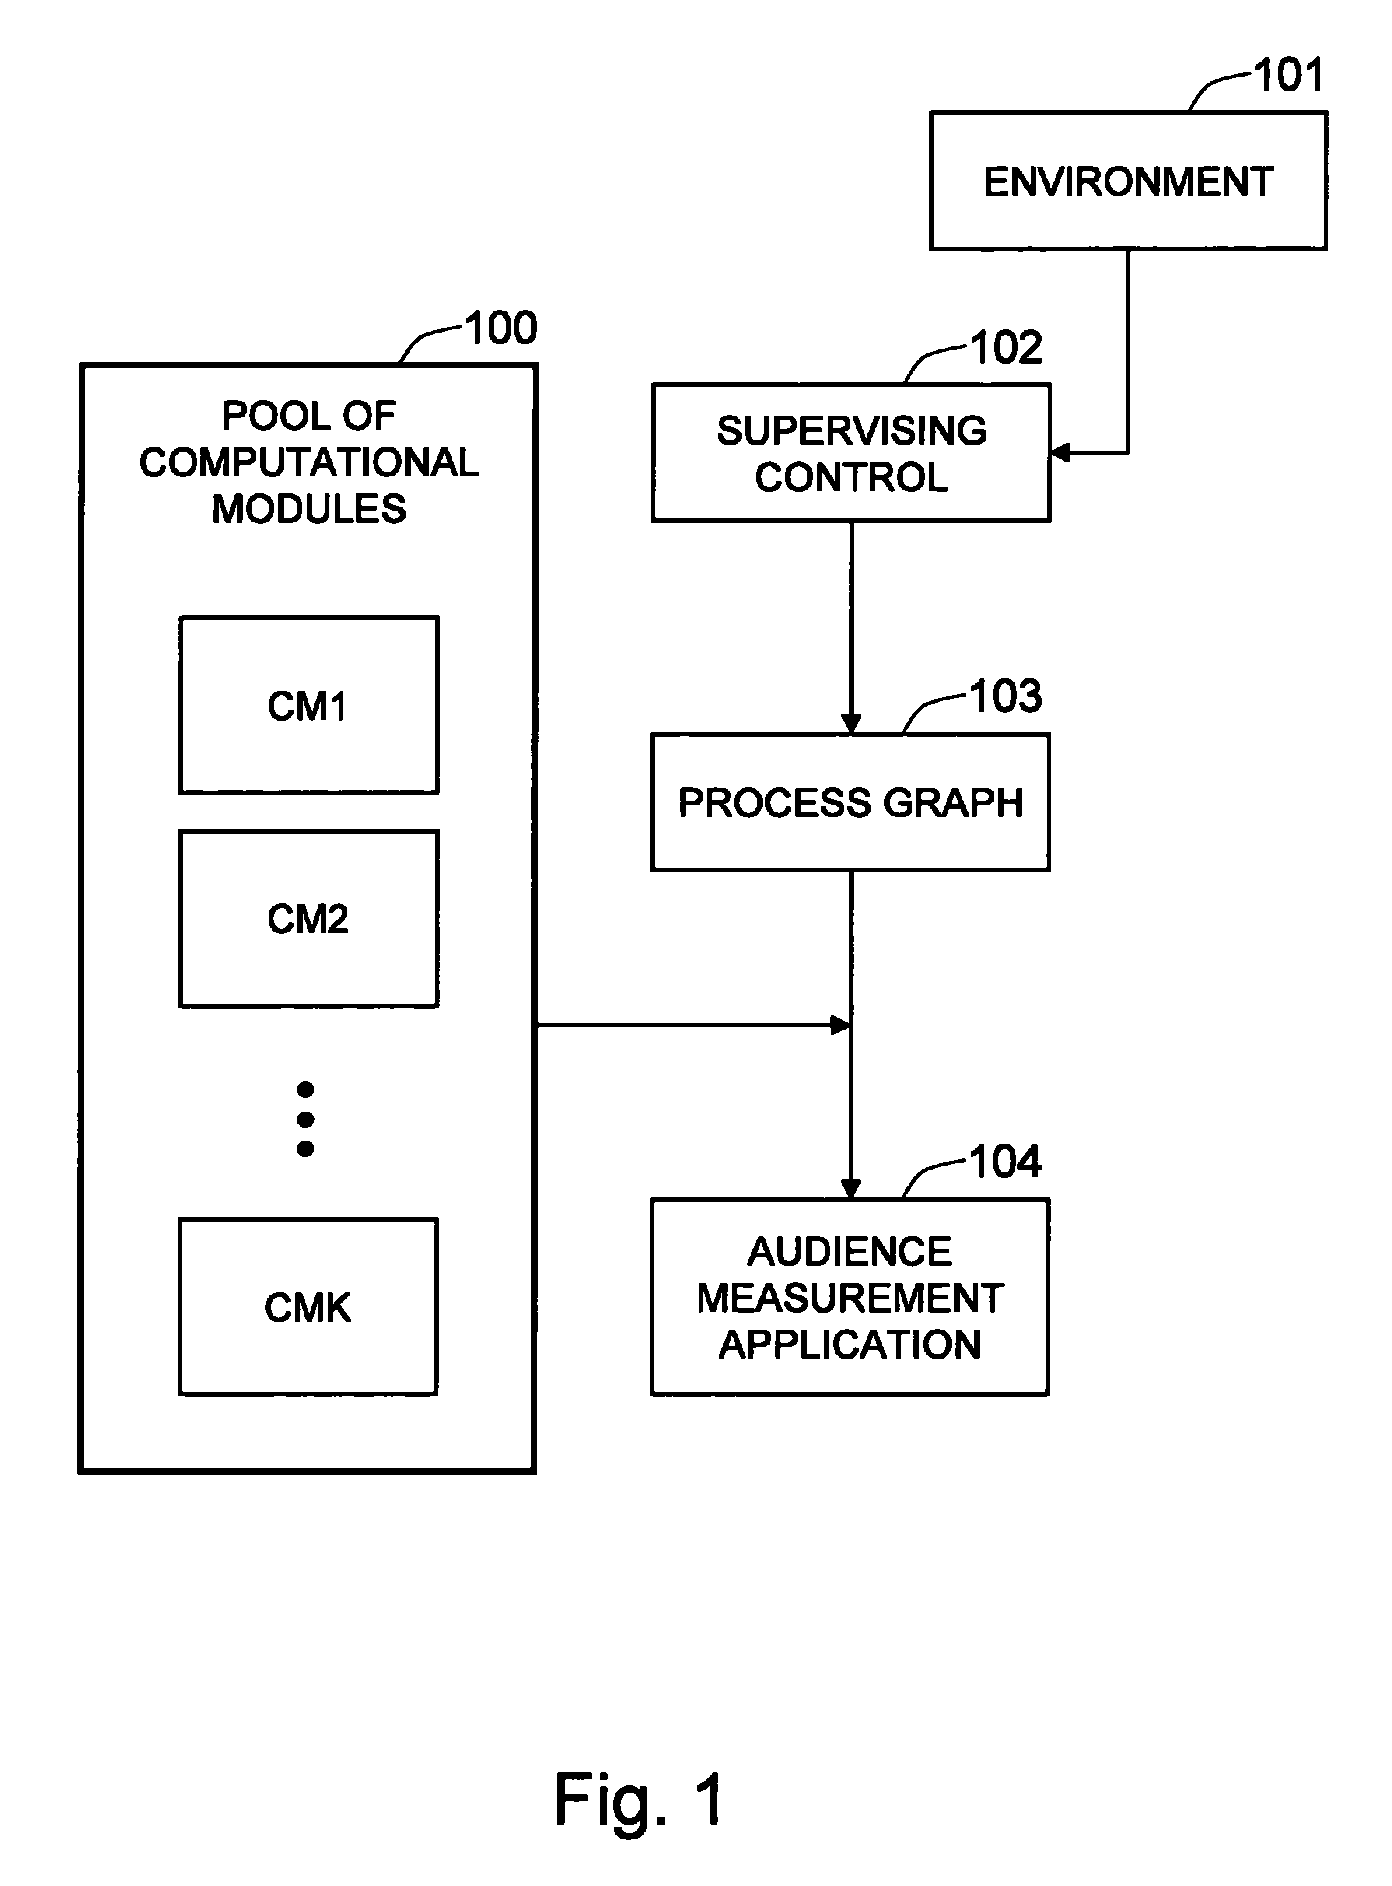 Apparatus and method for measuring audience data from image stream using dynamically-configurable hardware architecture